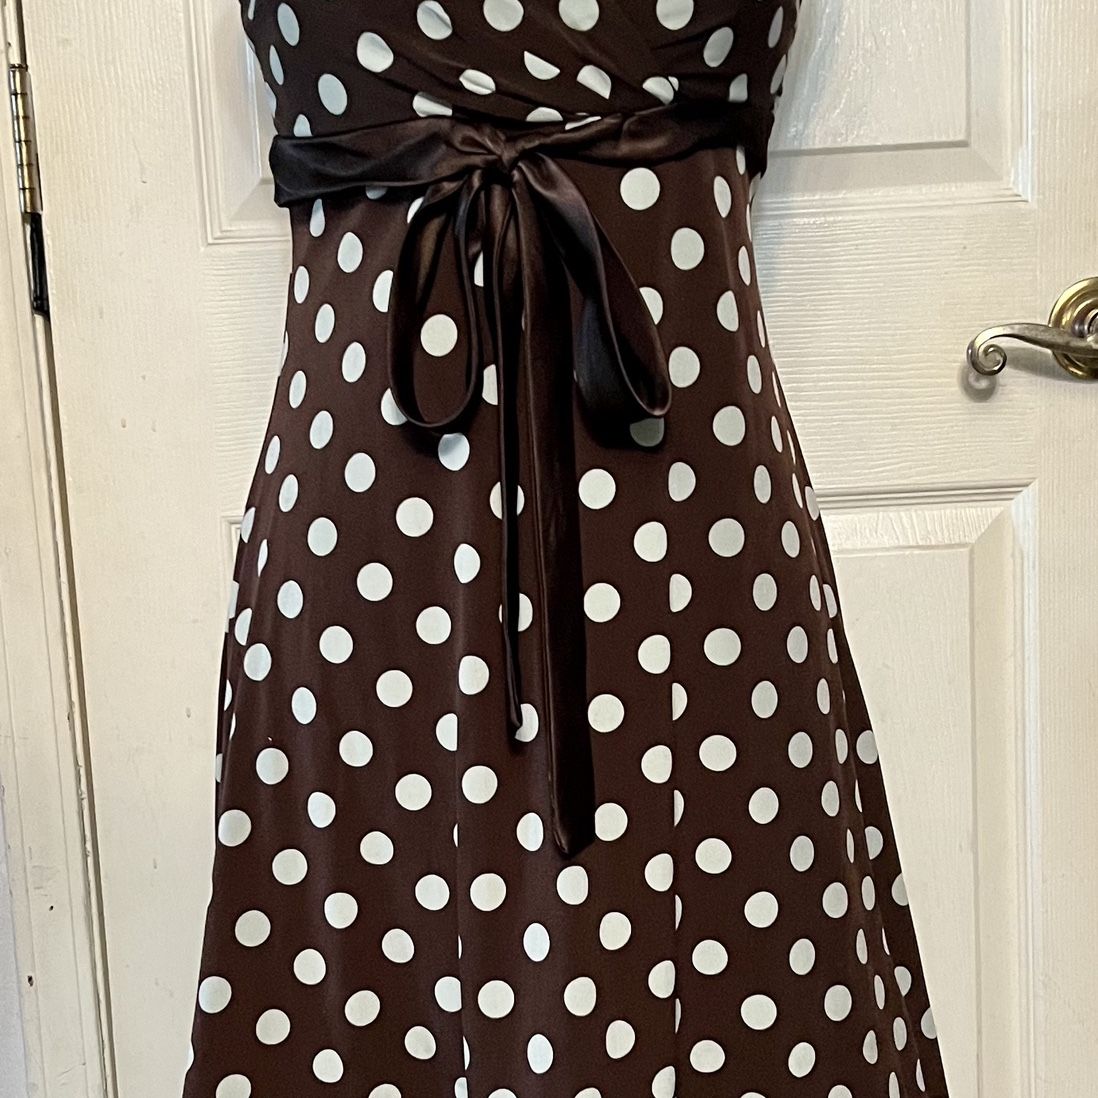 Medium brown with white  polka dots halter dress, “City Triangles”